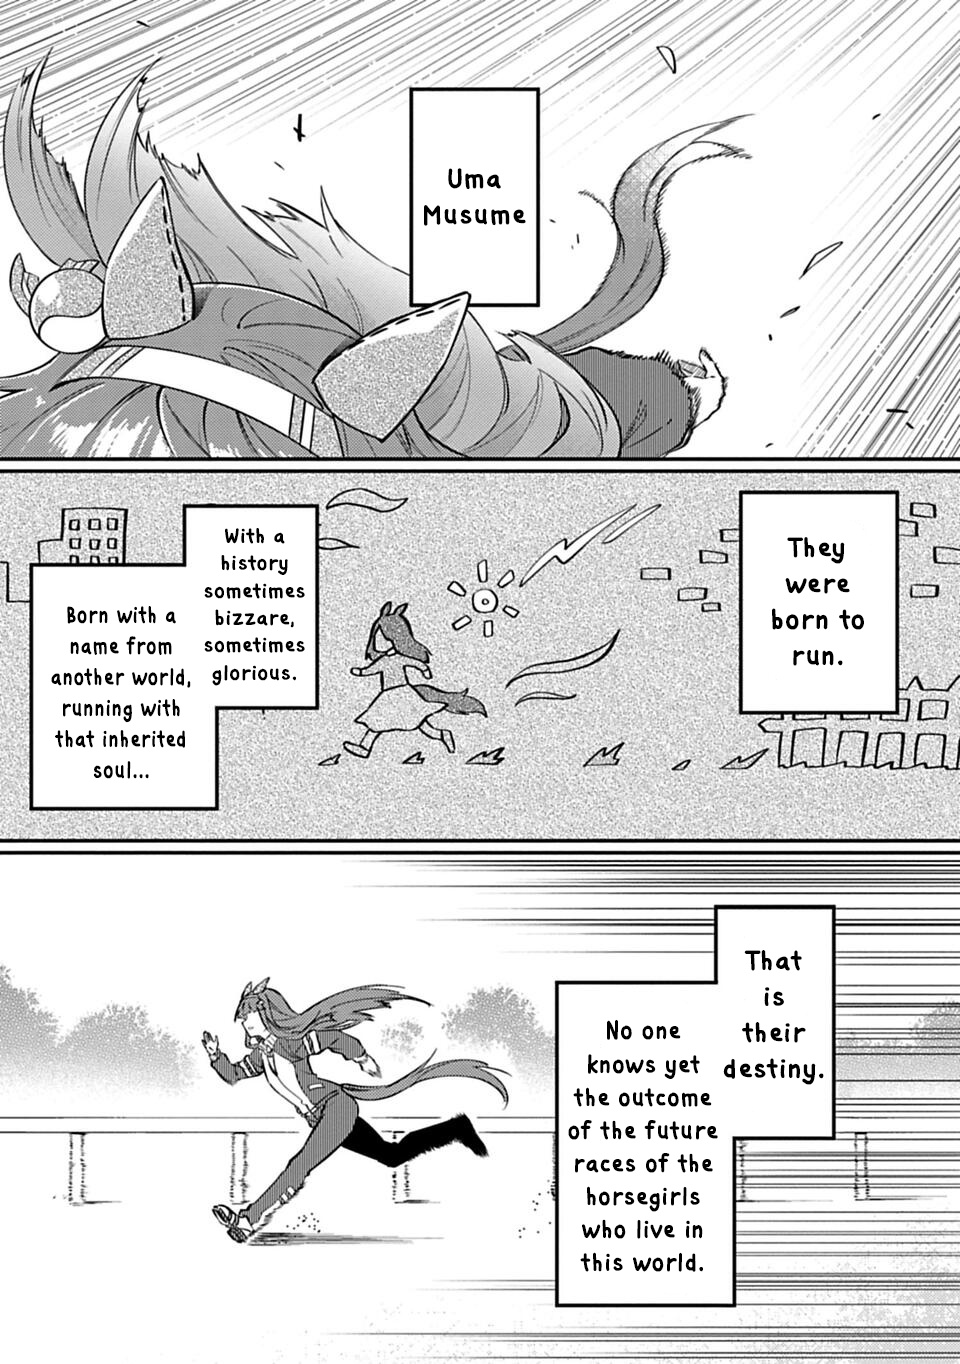 Uma Musume Pretty Derby: Uma Musumeshi Vol.1 Chapter 1 - Picture 1